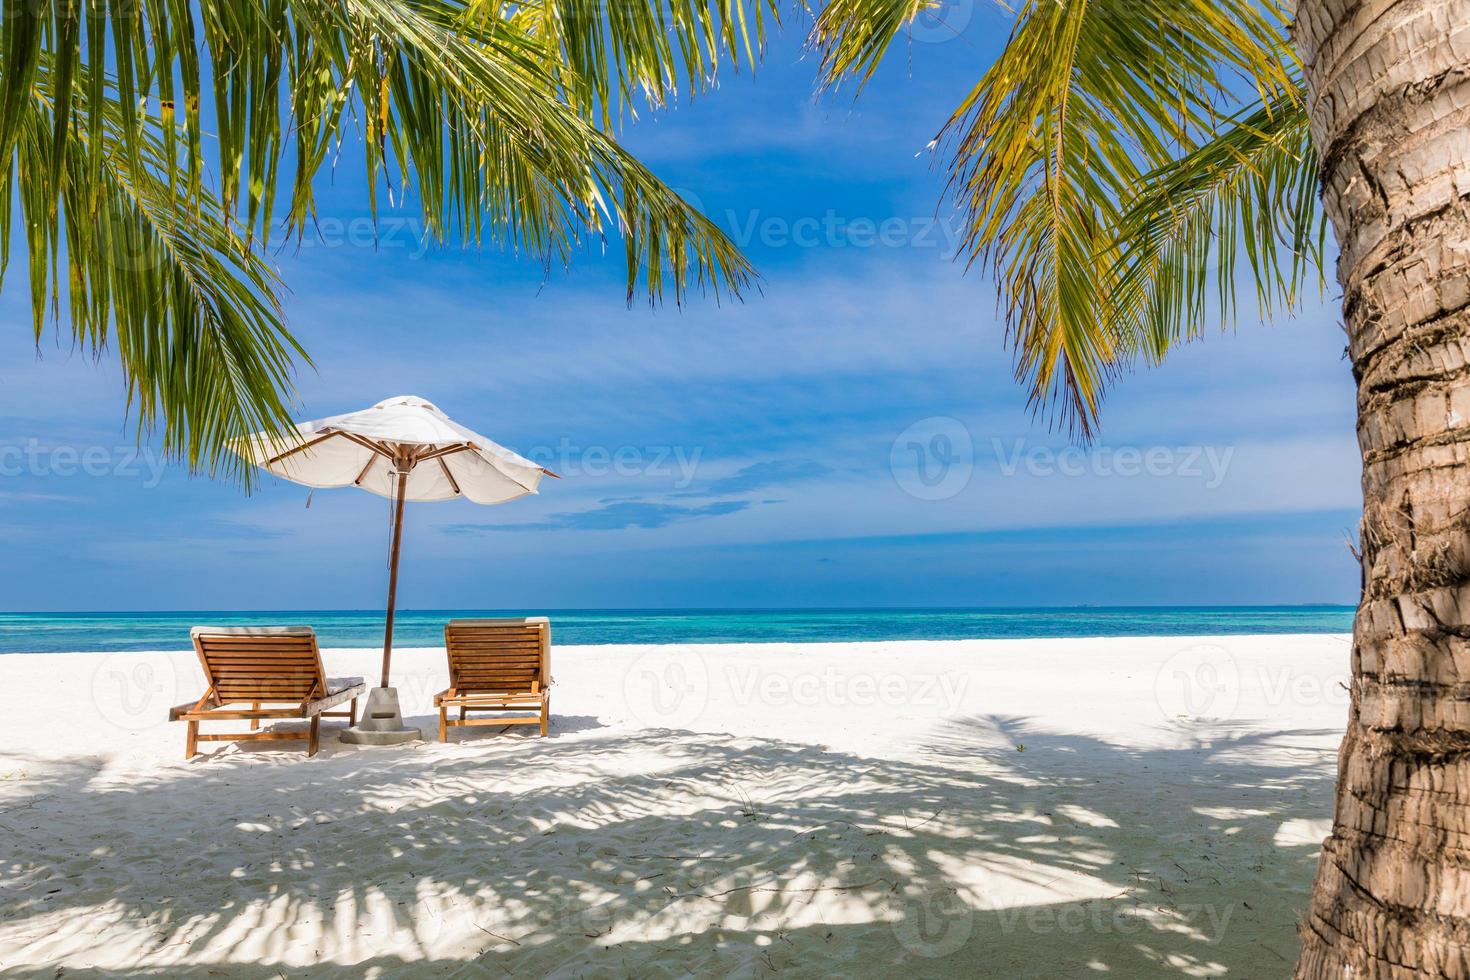 Beautiful tranquil beach. Chairs on the sandy beach near the sea. Summer holiday and vacation concept for tourism. Inspirational tropical landscape, boost up color process. Exotic travel destination photo